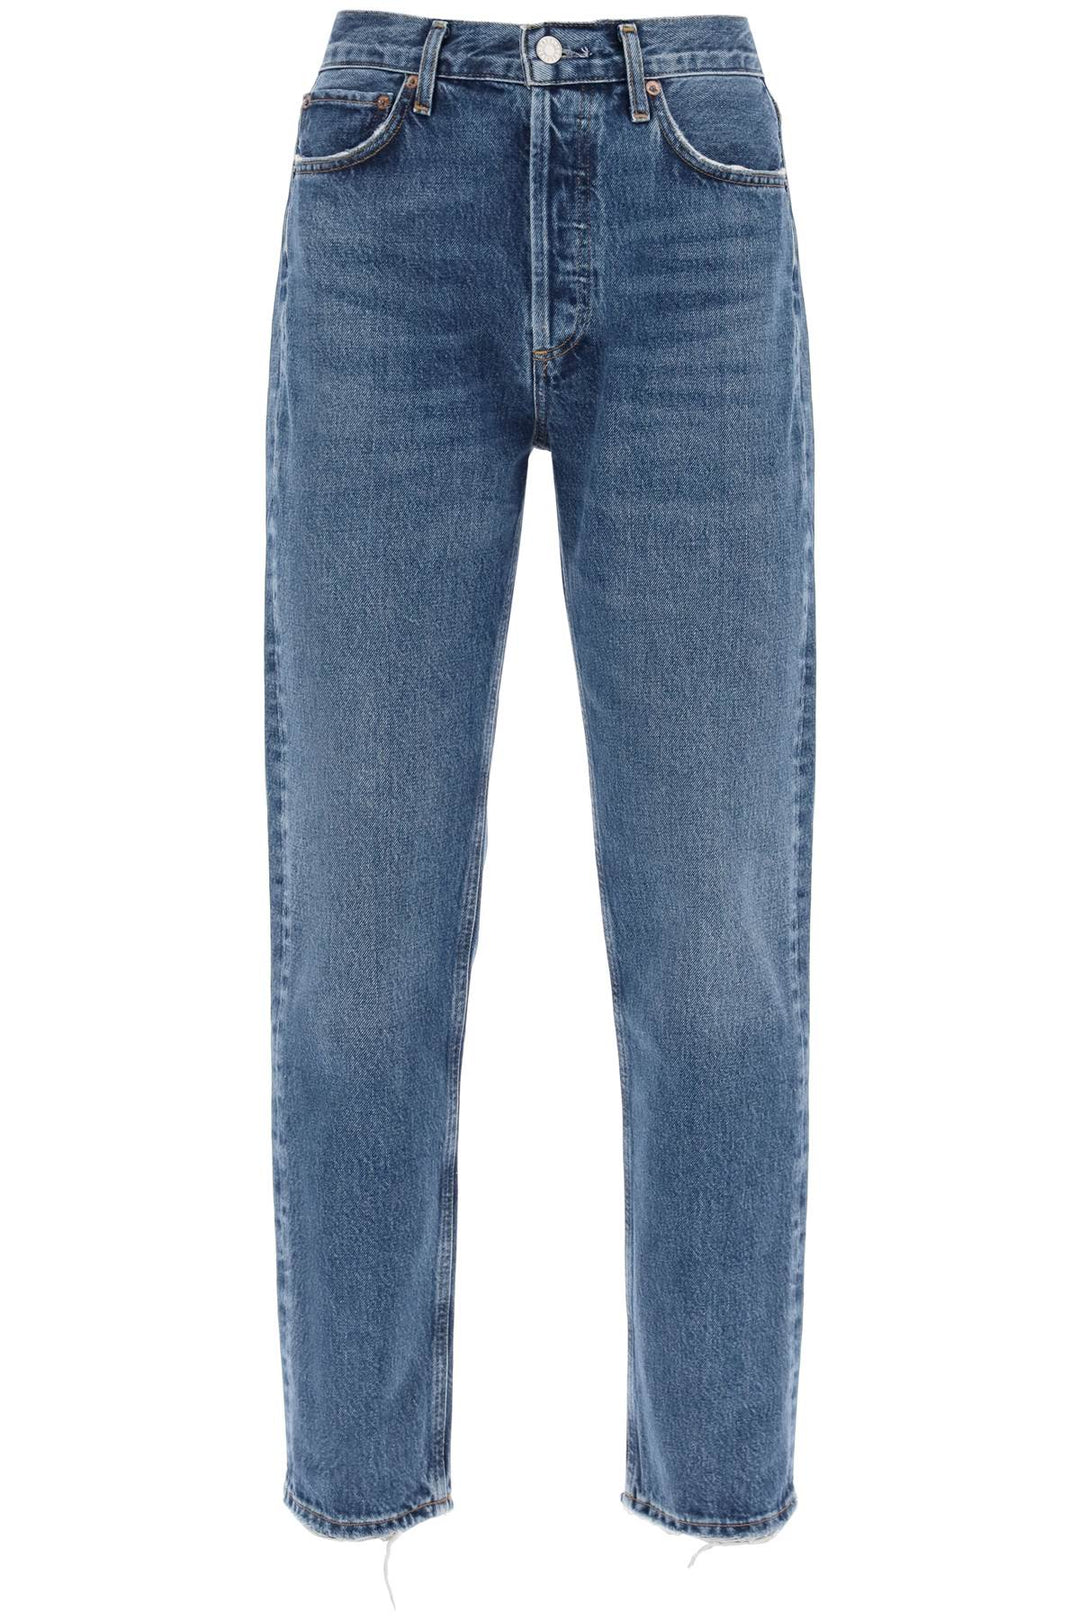 Agolde Straight Leg Jeans From The 90's With High Waist   Blu